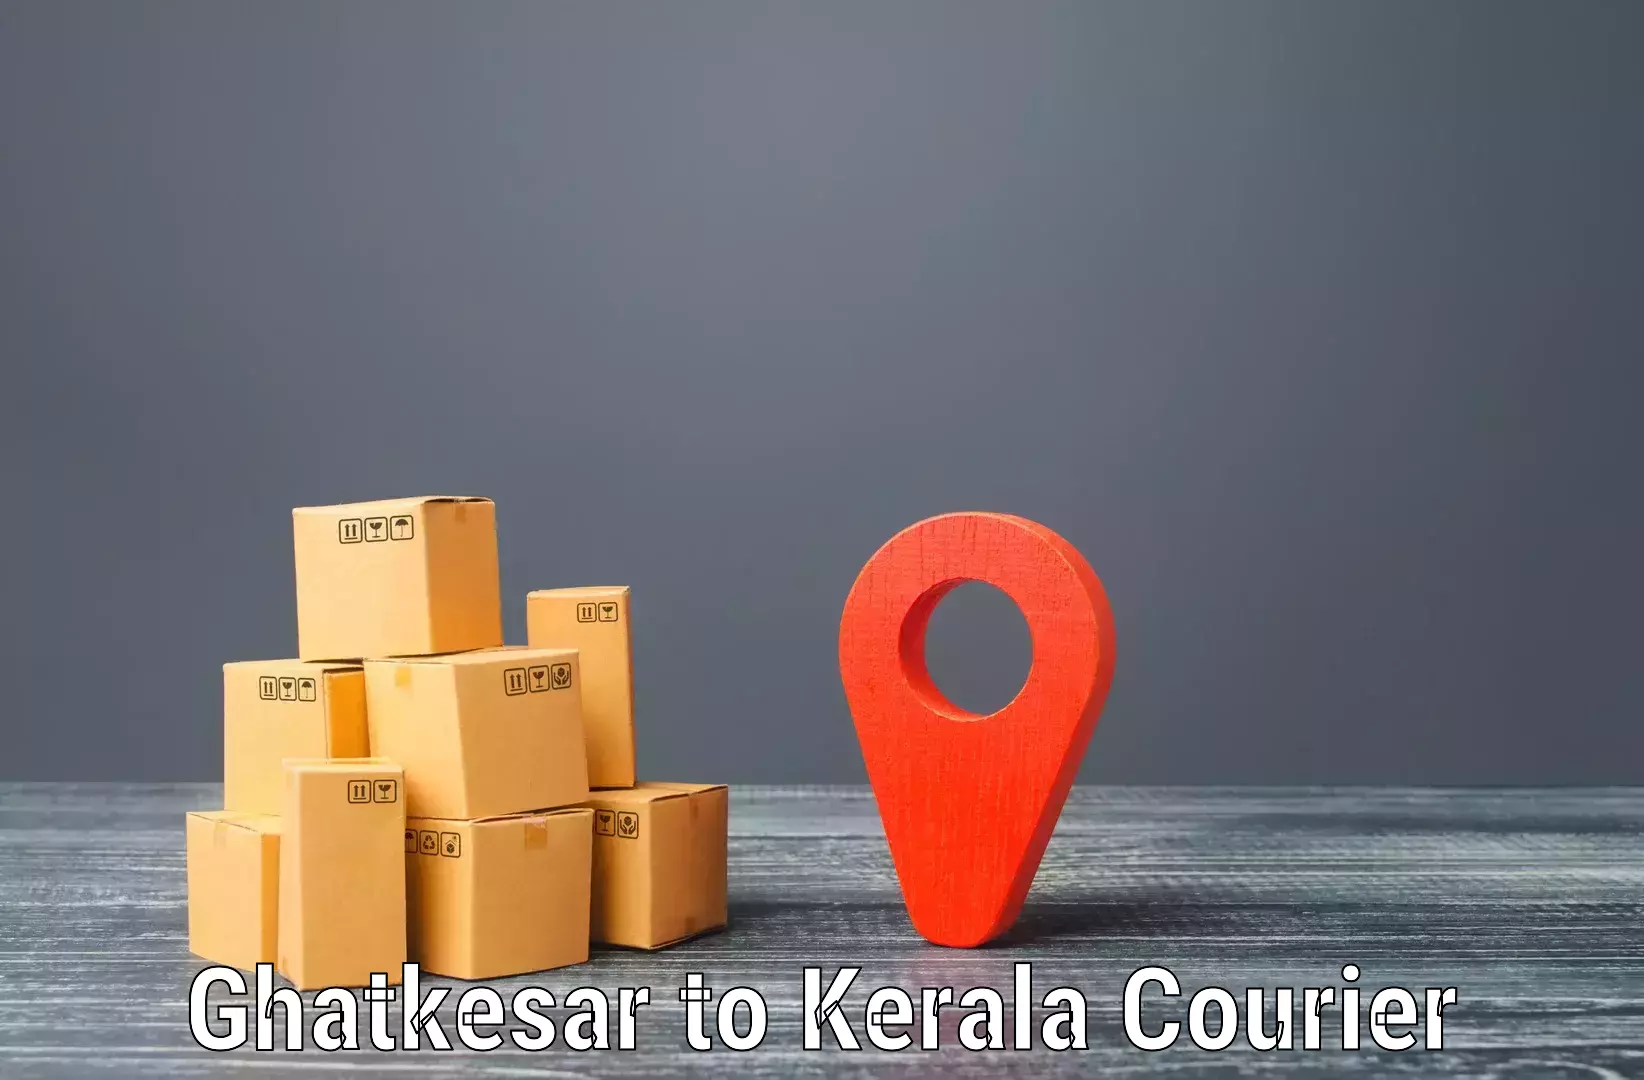 End-to-end delivery Ghatkesar to Kerala